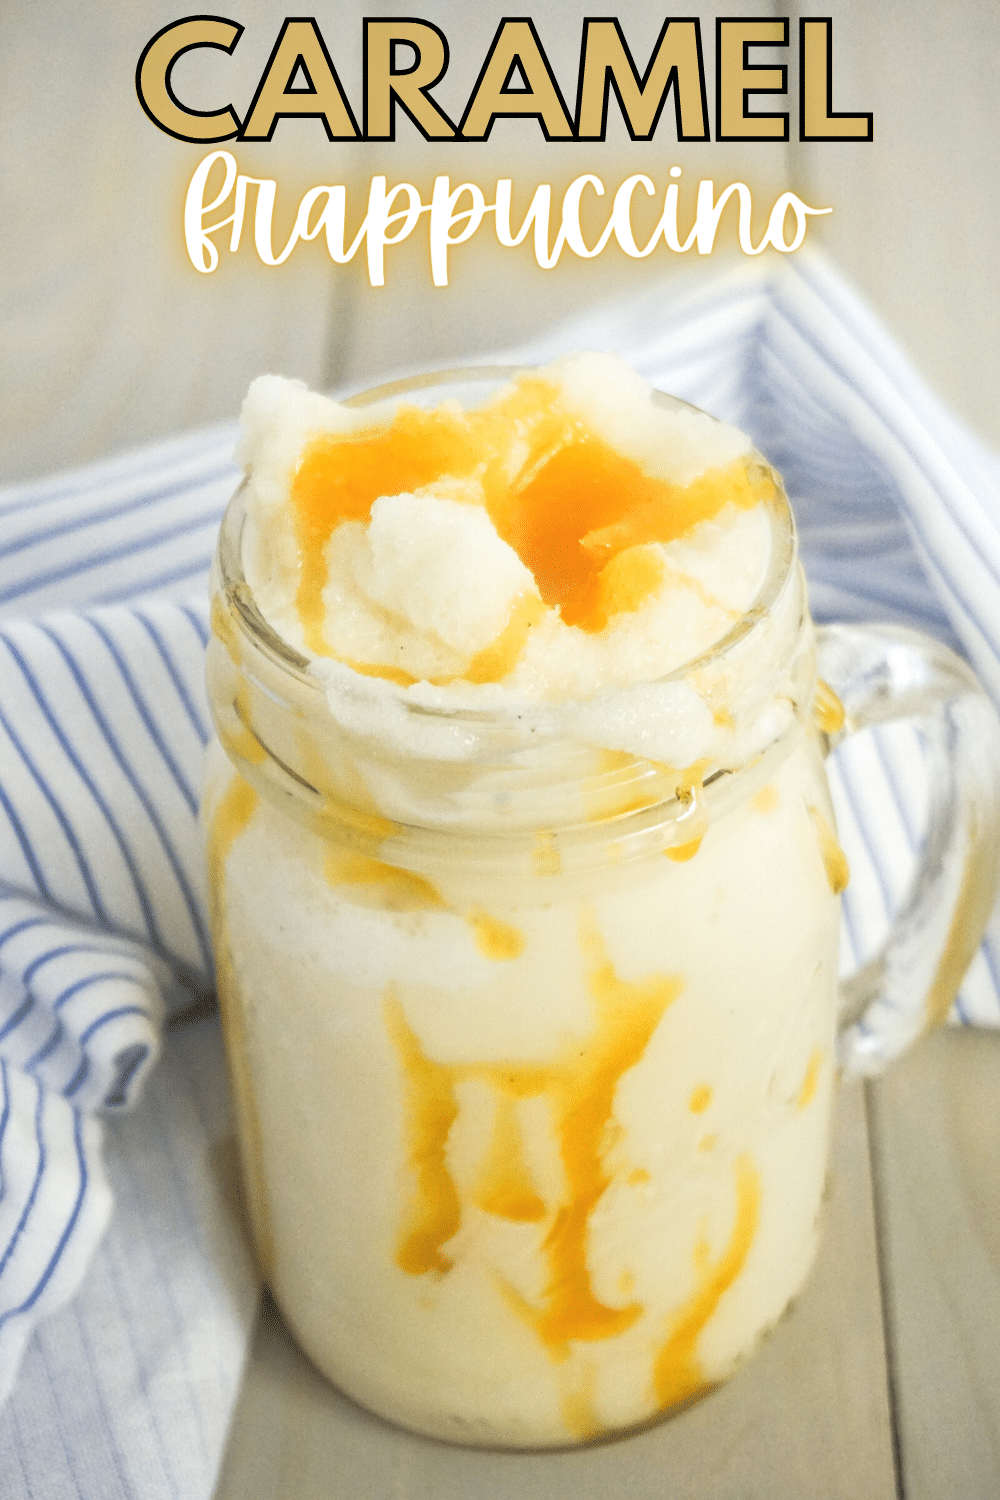 If you’re looking for a copycat recipe for the famous Starbucks caramel frappuccino, you’ve found it. This drink hits all the right spots! #starbuckscopycatrecipe #caramelfrappuccino #copycatrecipe #caramel #frappucino via @wondermomwannab